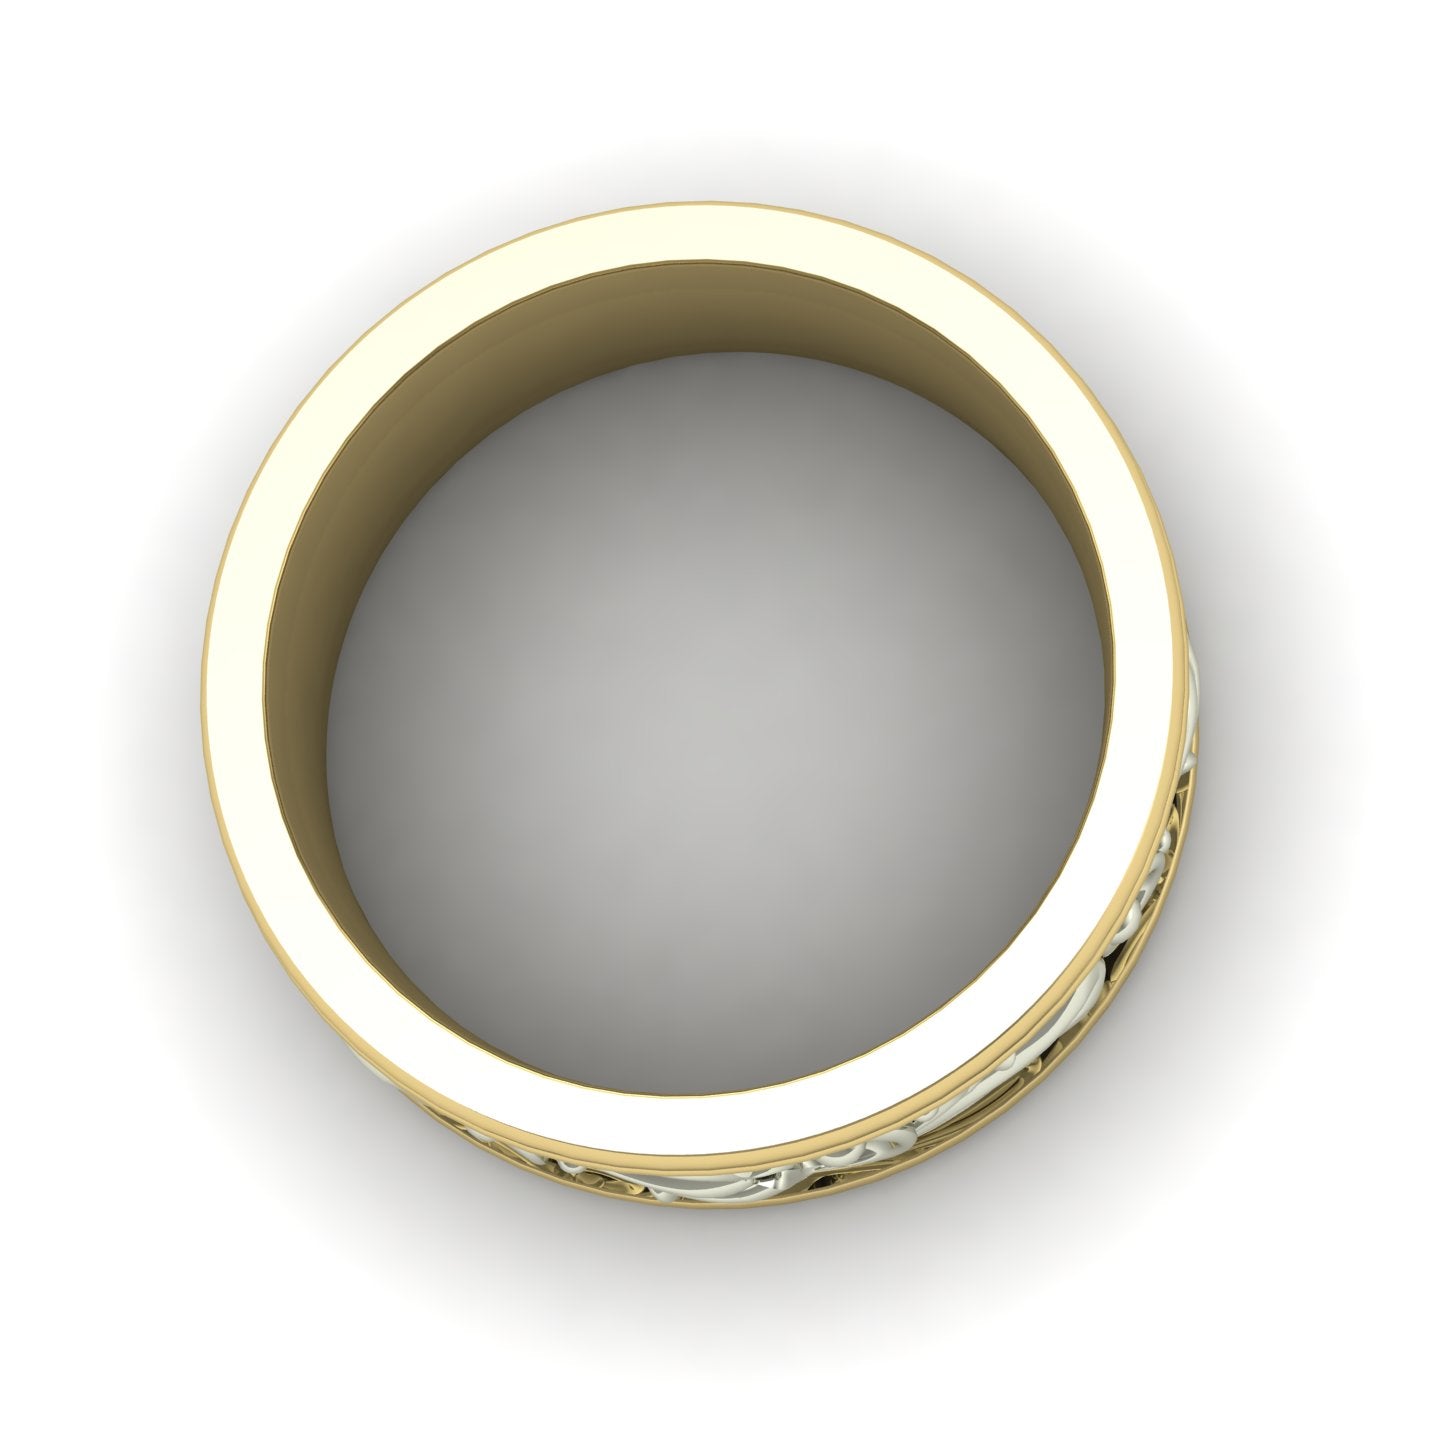 gents wide two tone scroll wedding band in 14k yellow and white gold - Charles Babb Designs - through finger view